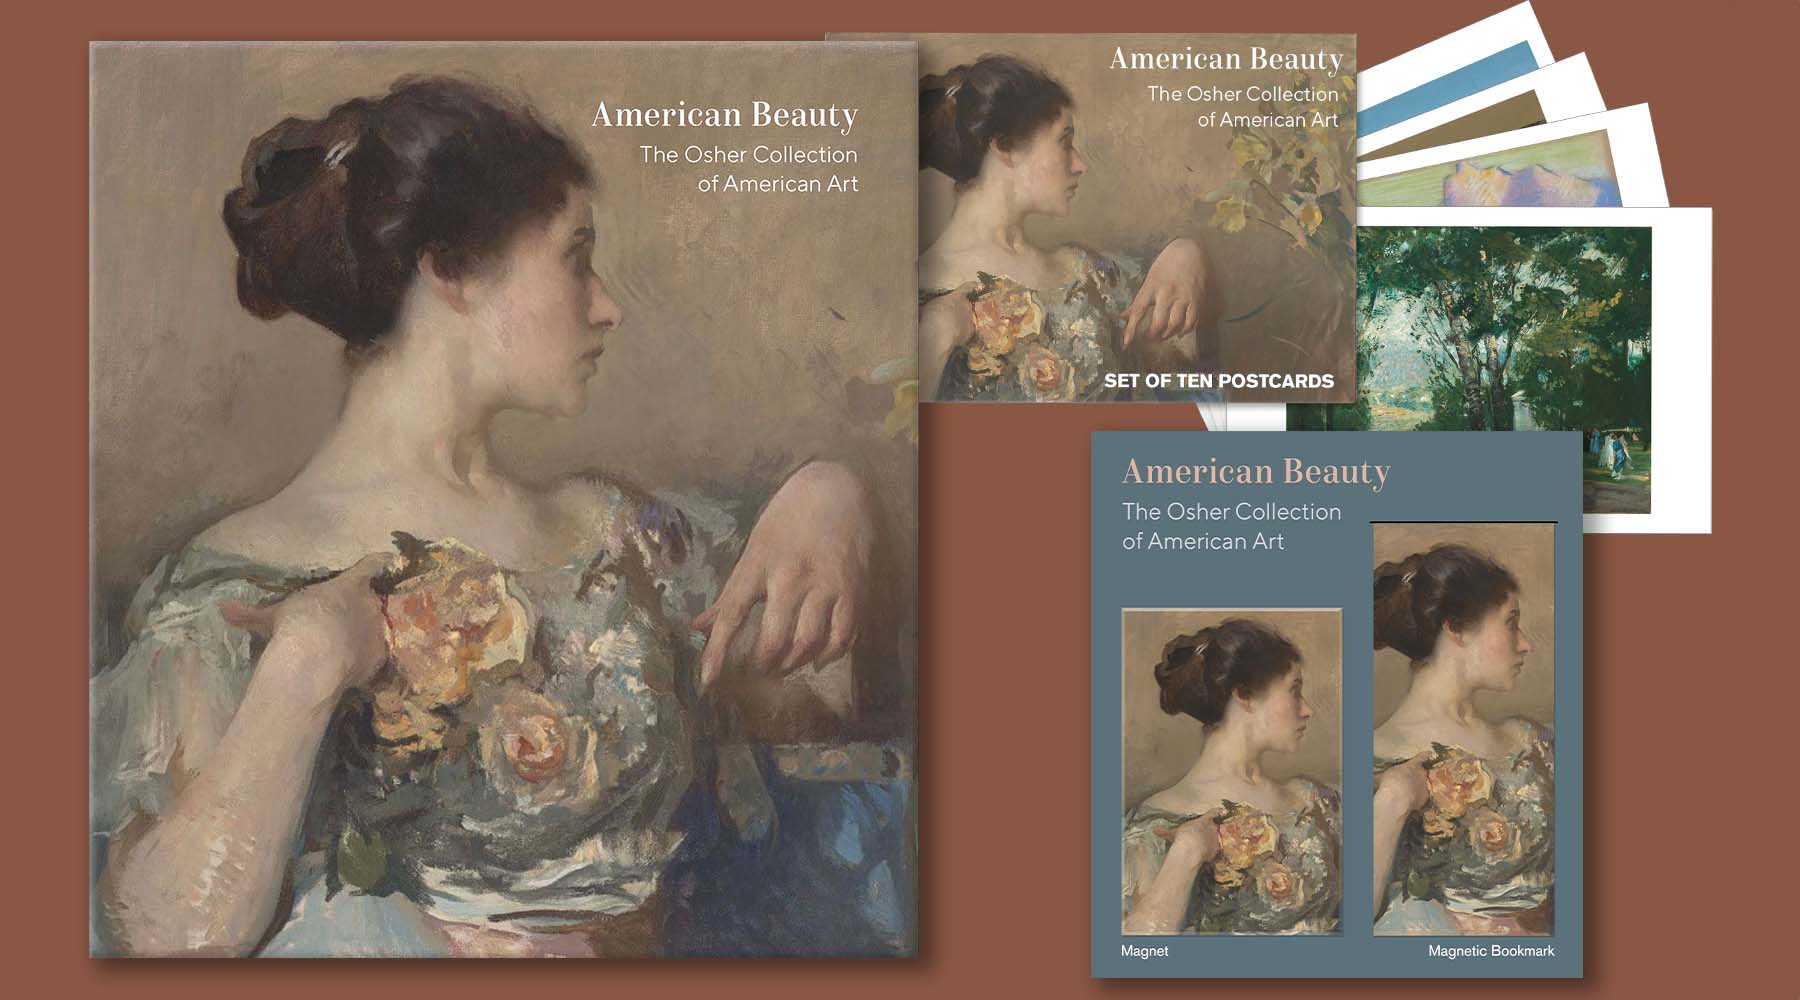 American Beauty: The Osher Collection of American Art